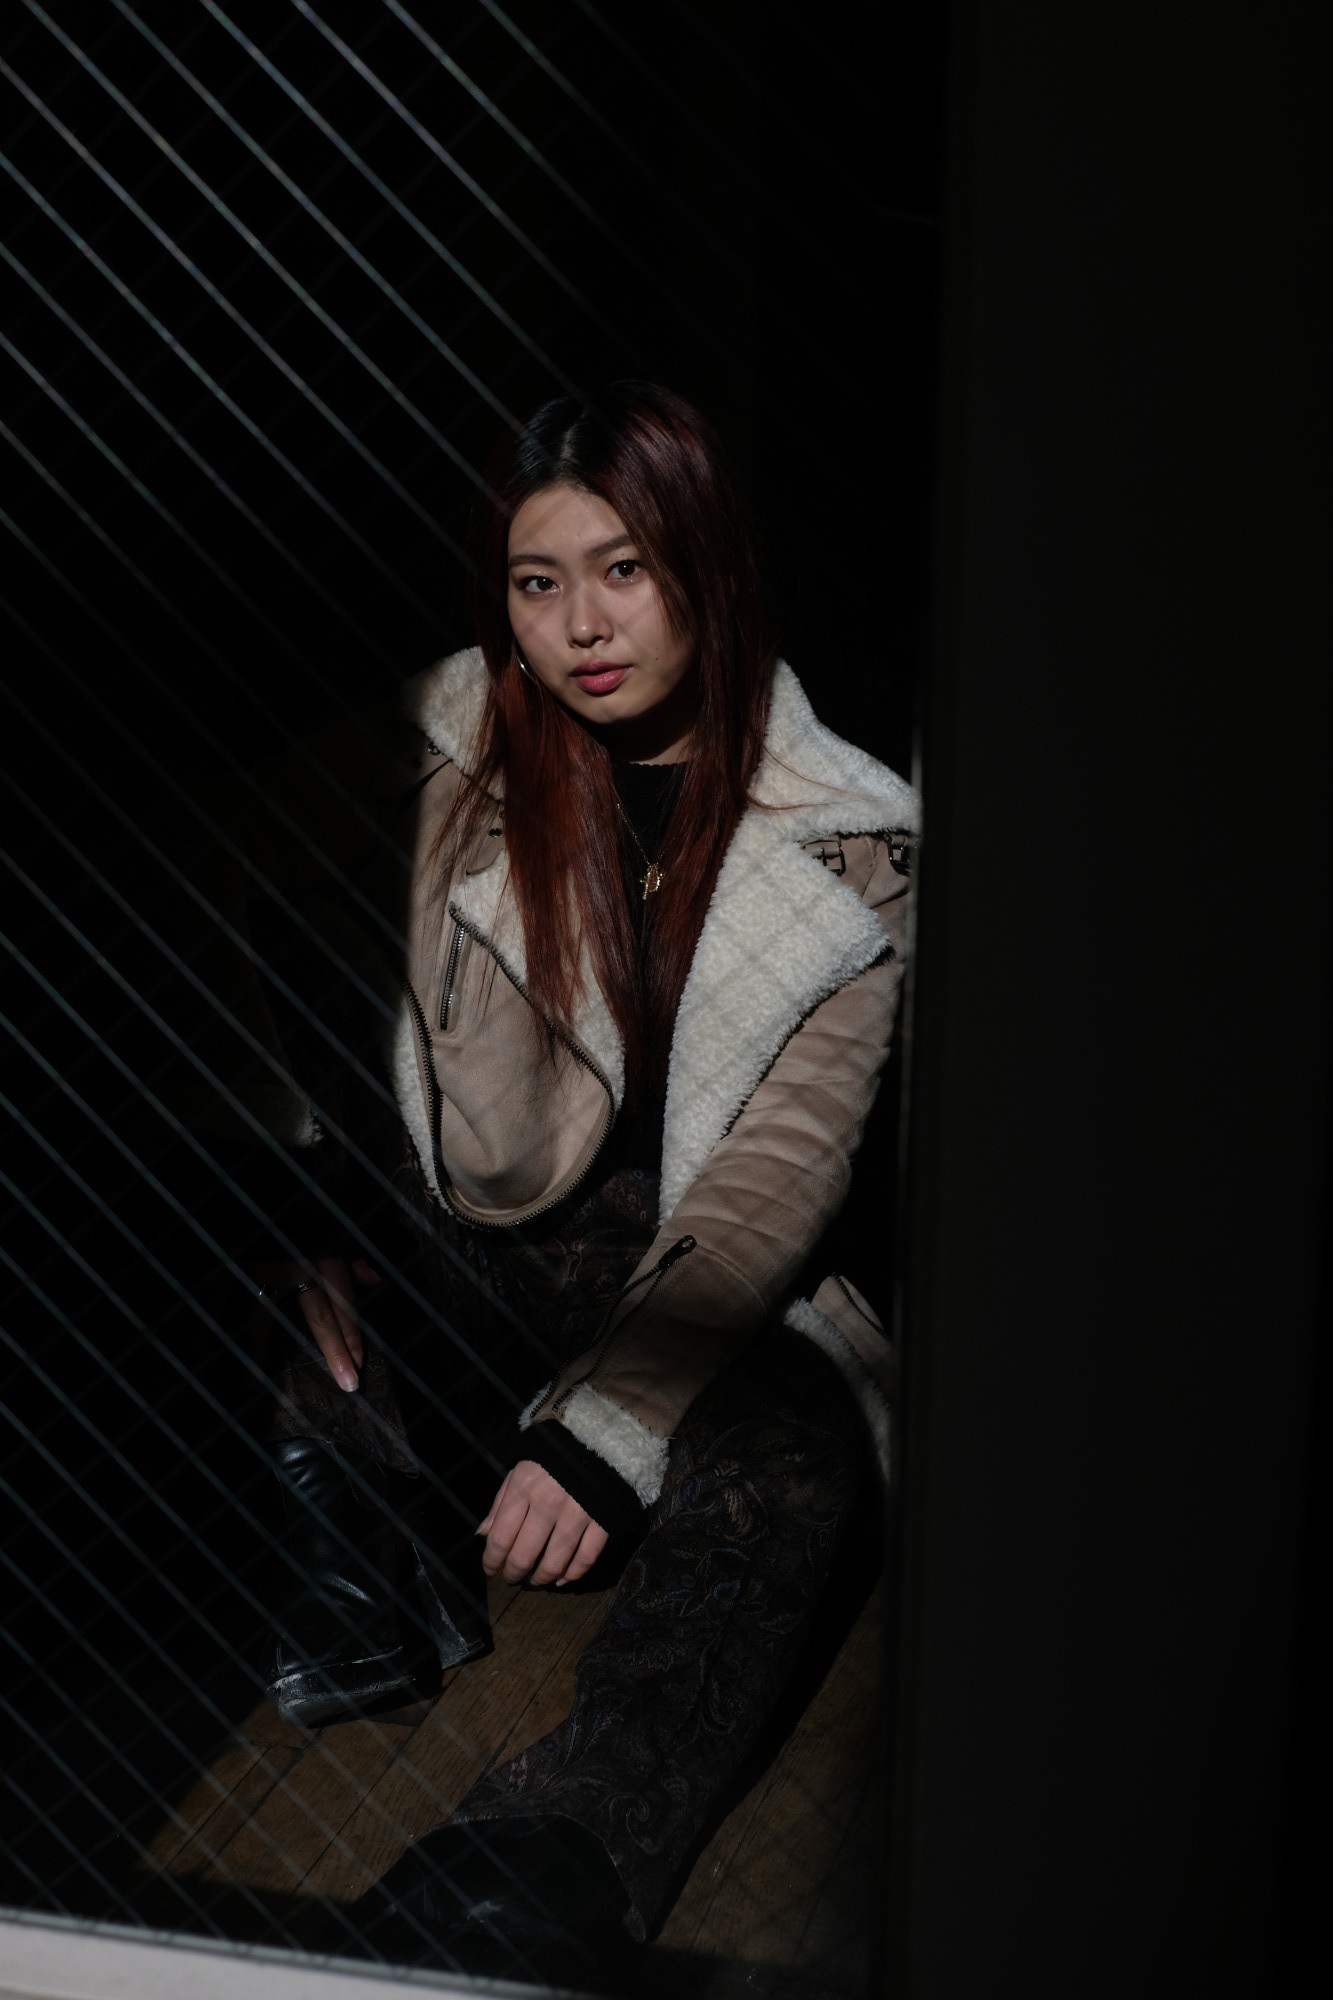 Japanese girl in black outfit and shearling jacket